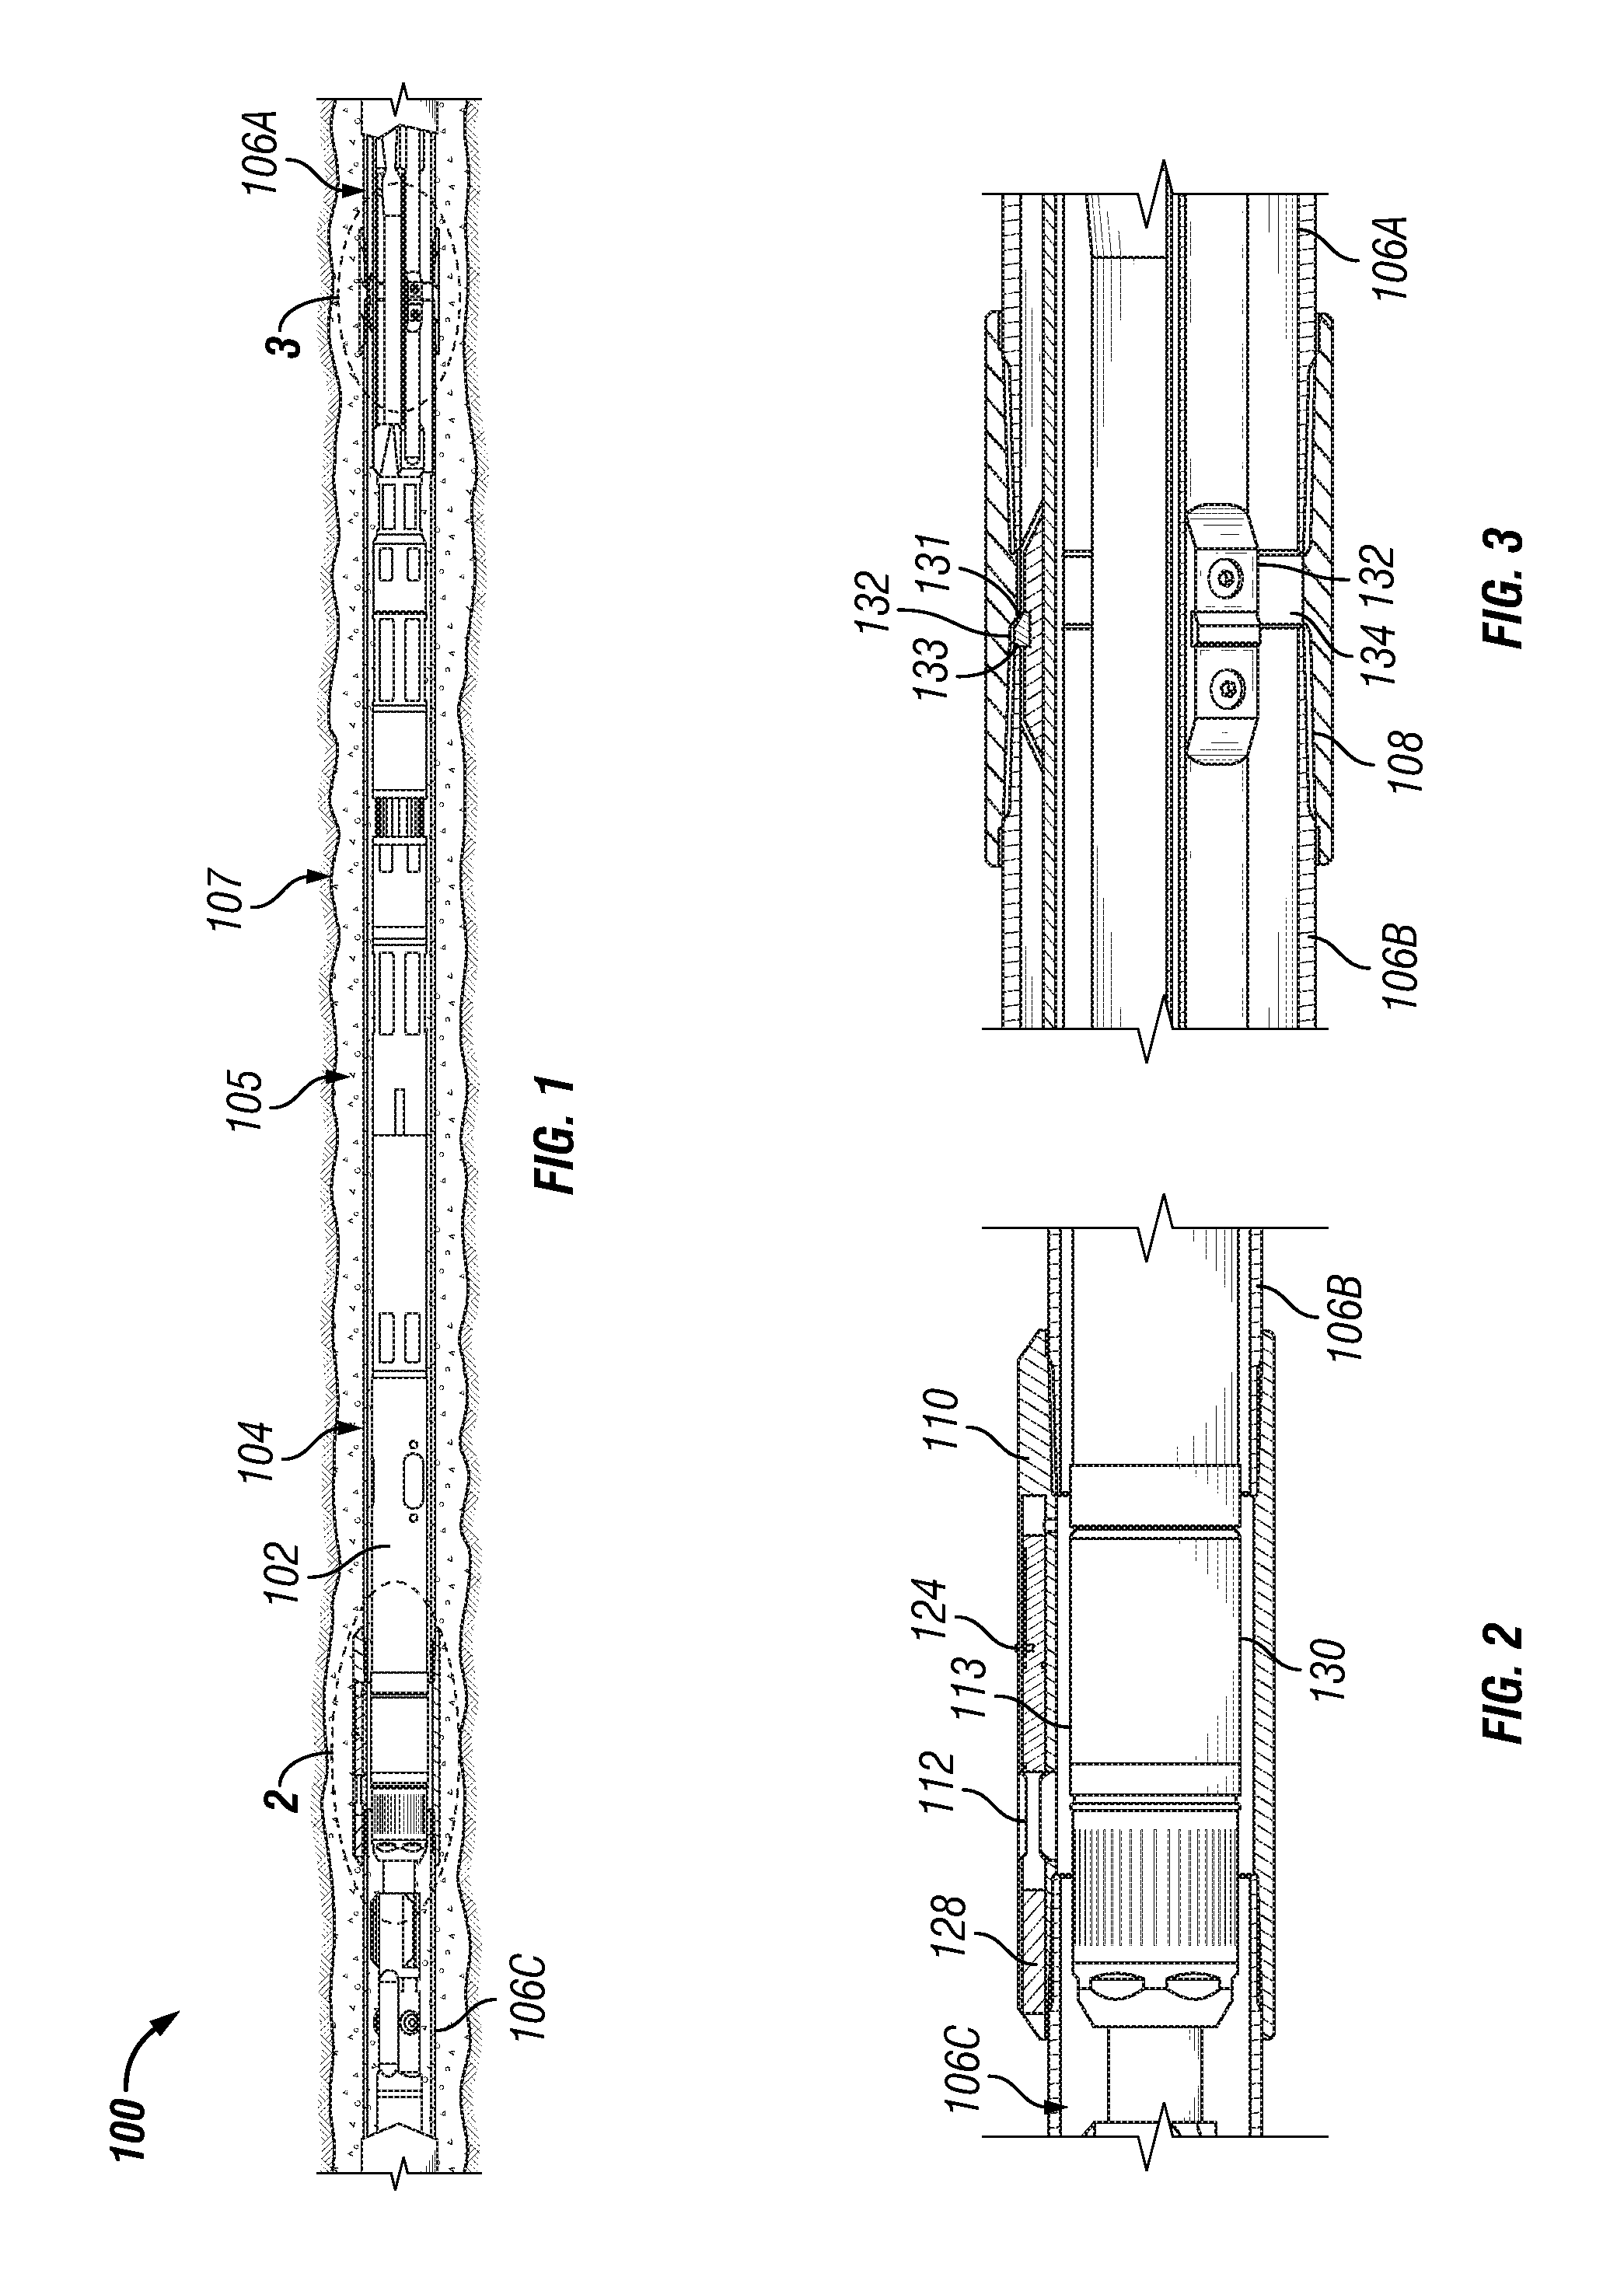 Bottom hole assembly with ported completion and methods of fracturing therewith